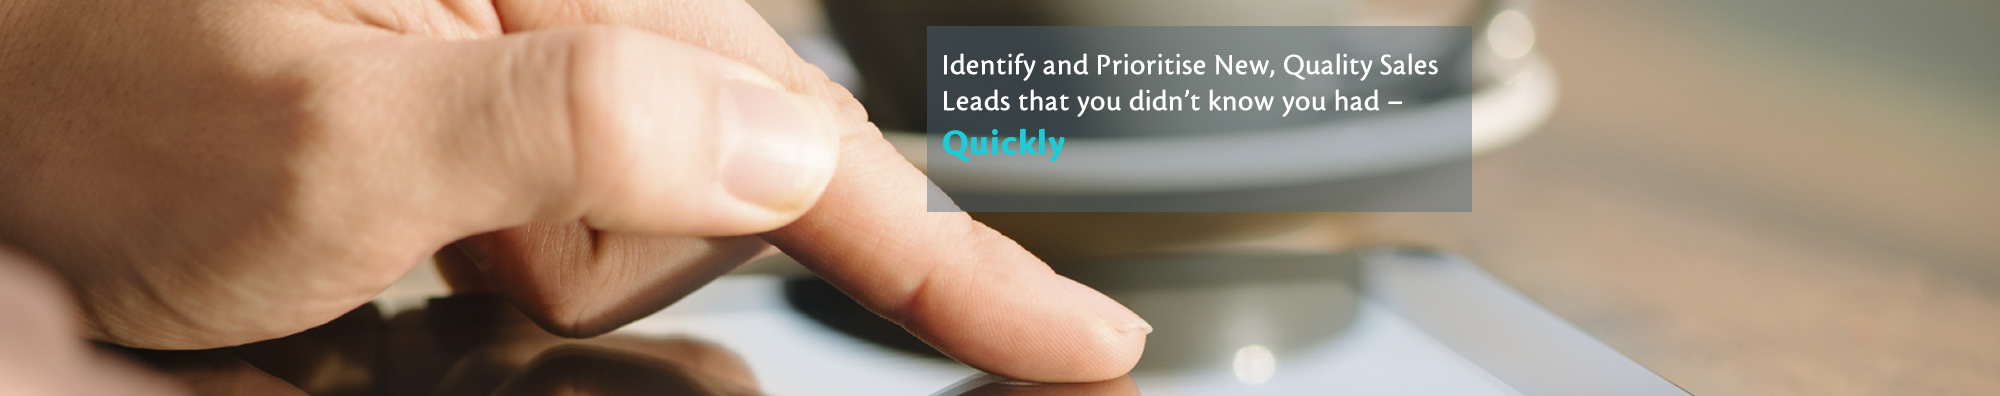 Identify and Prioritise New, Quality Sales Leads that you didn’t know you had – Quickly